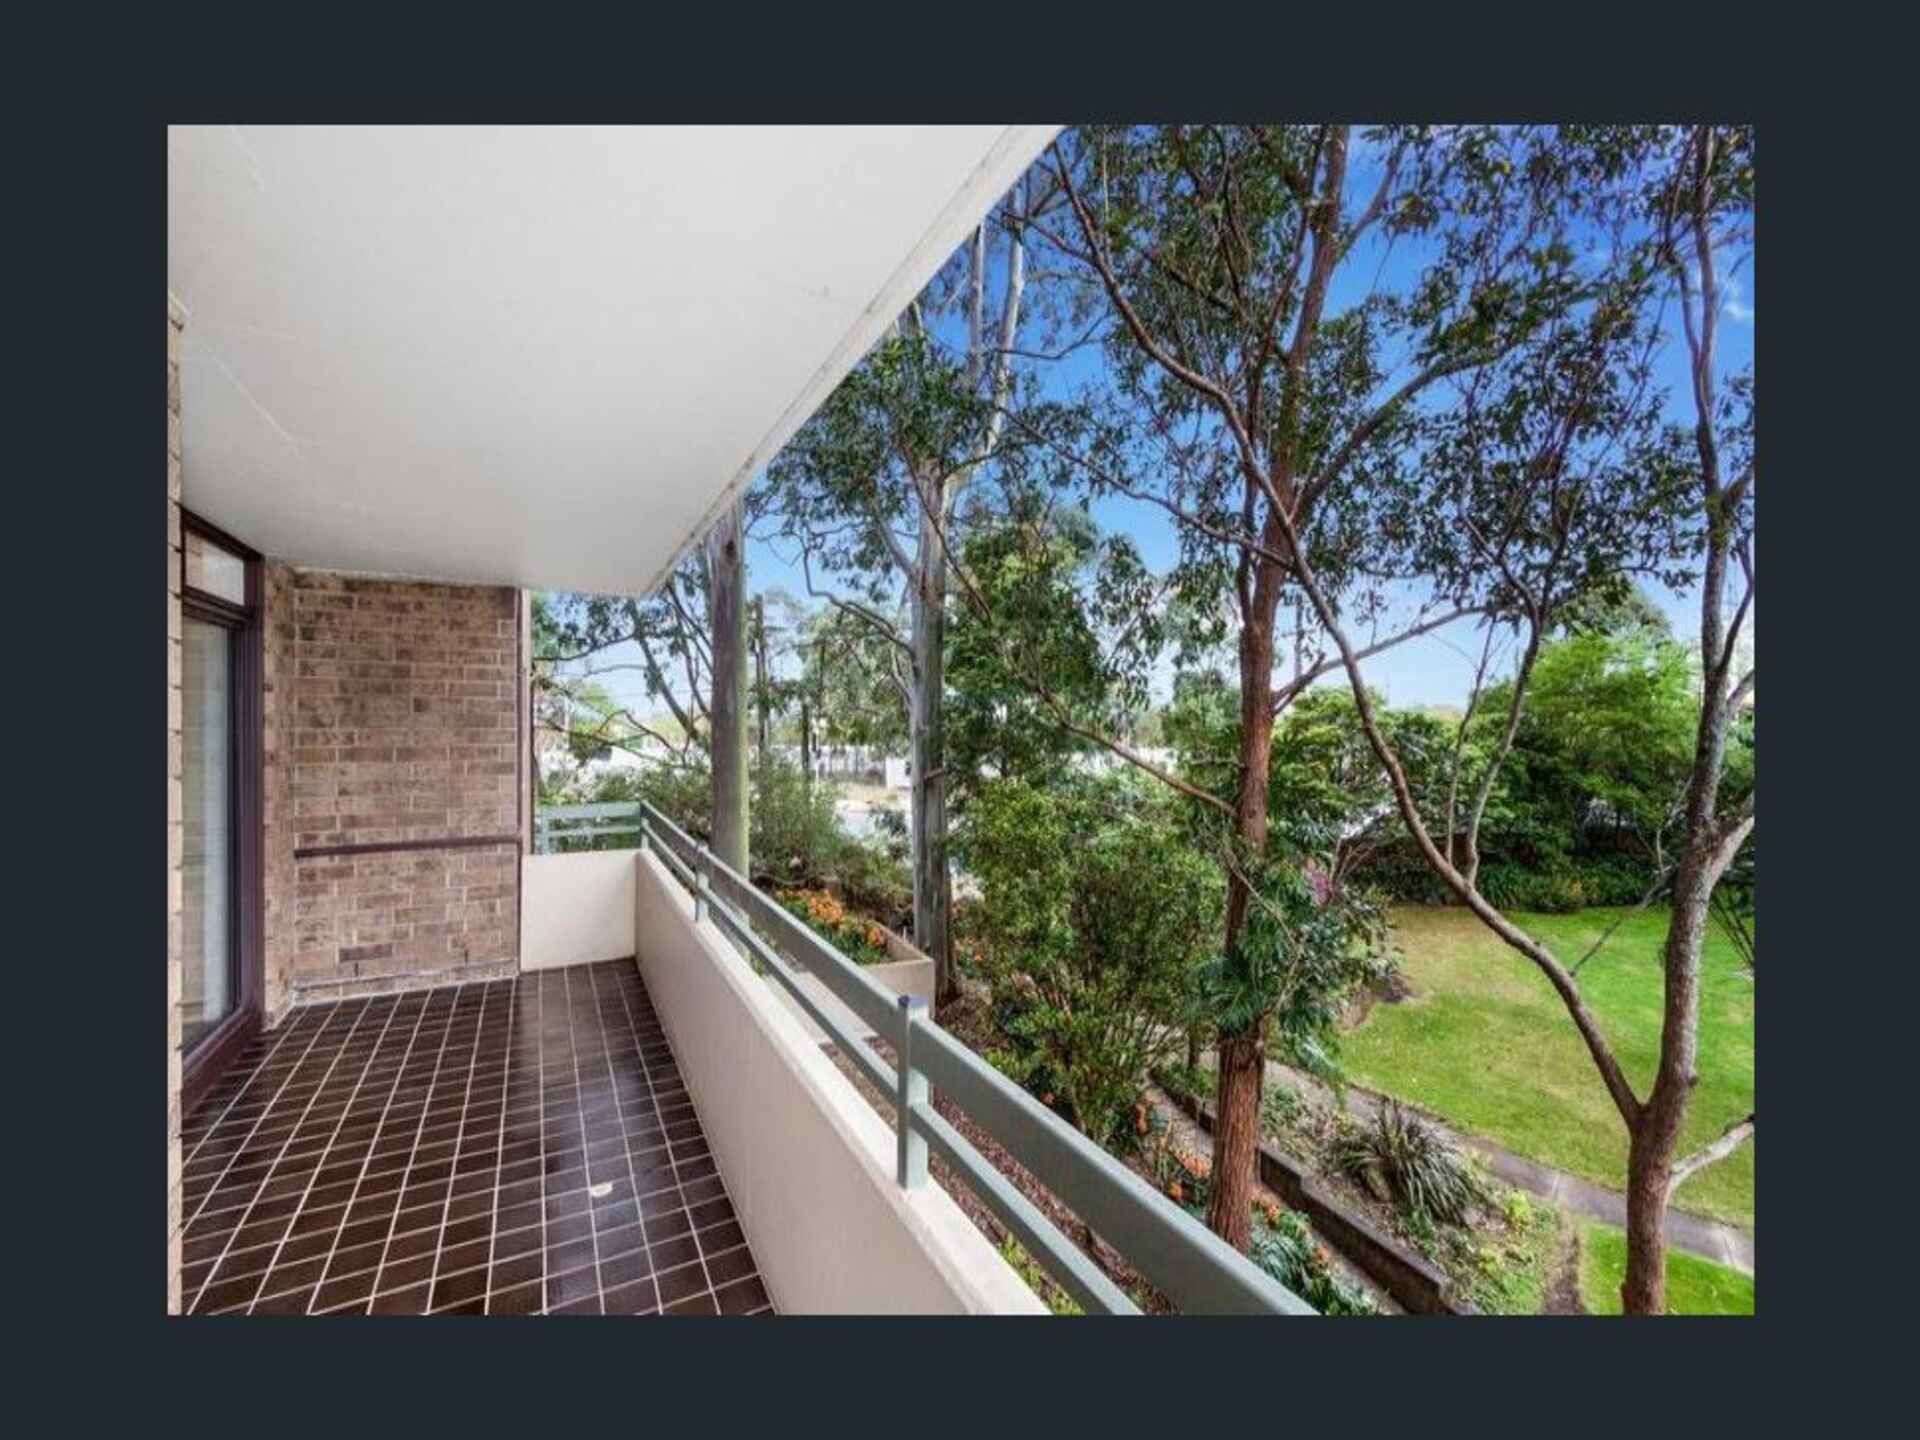 7/882 Pacific Highway Chatswood